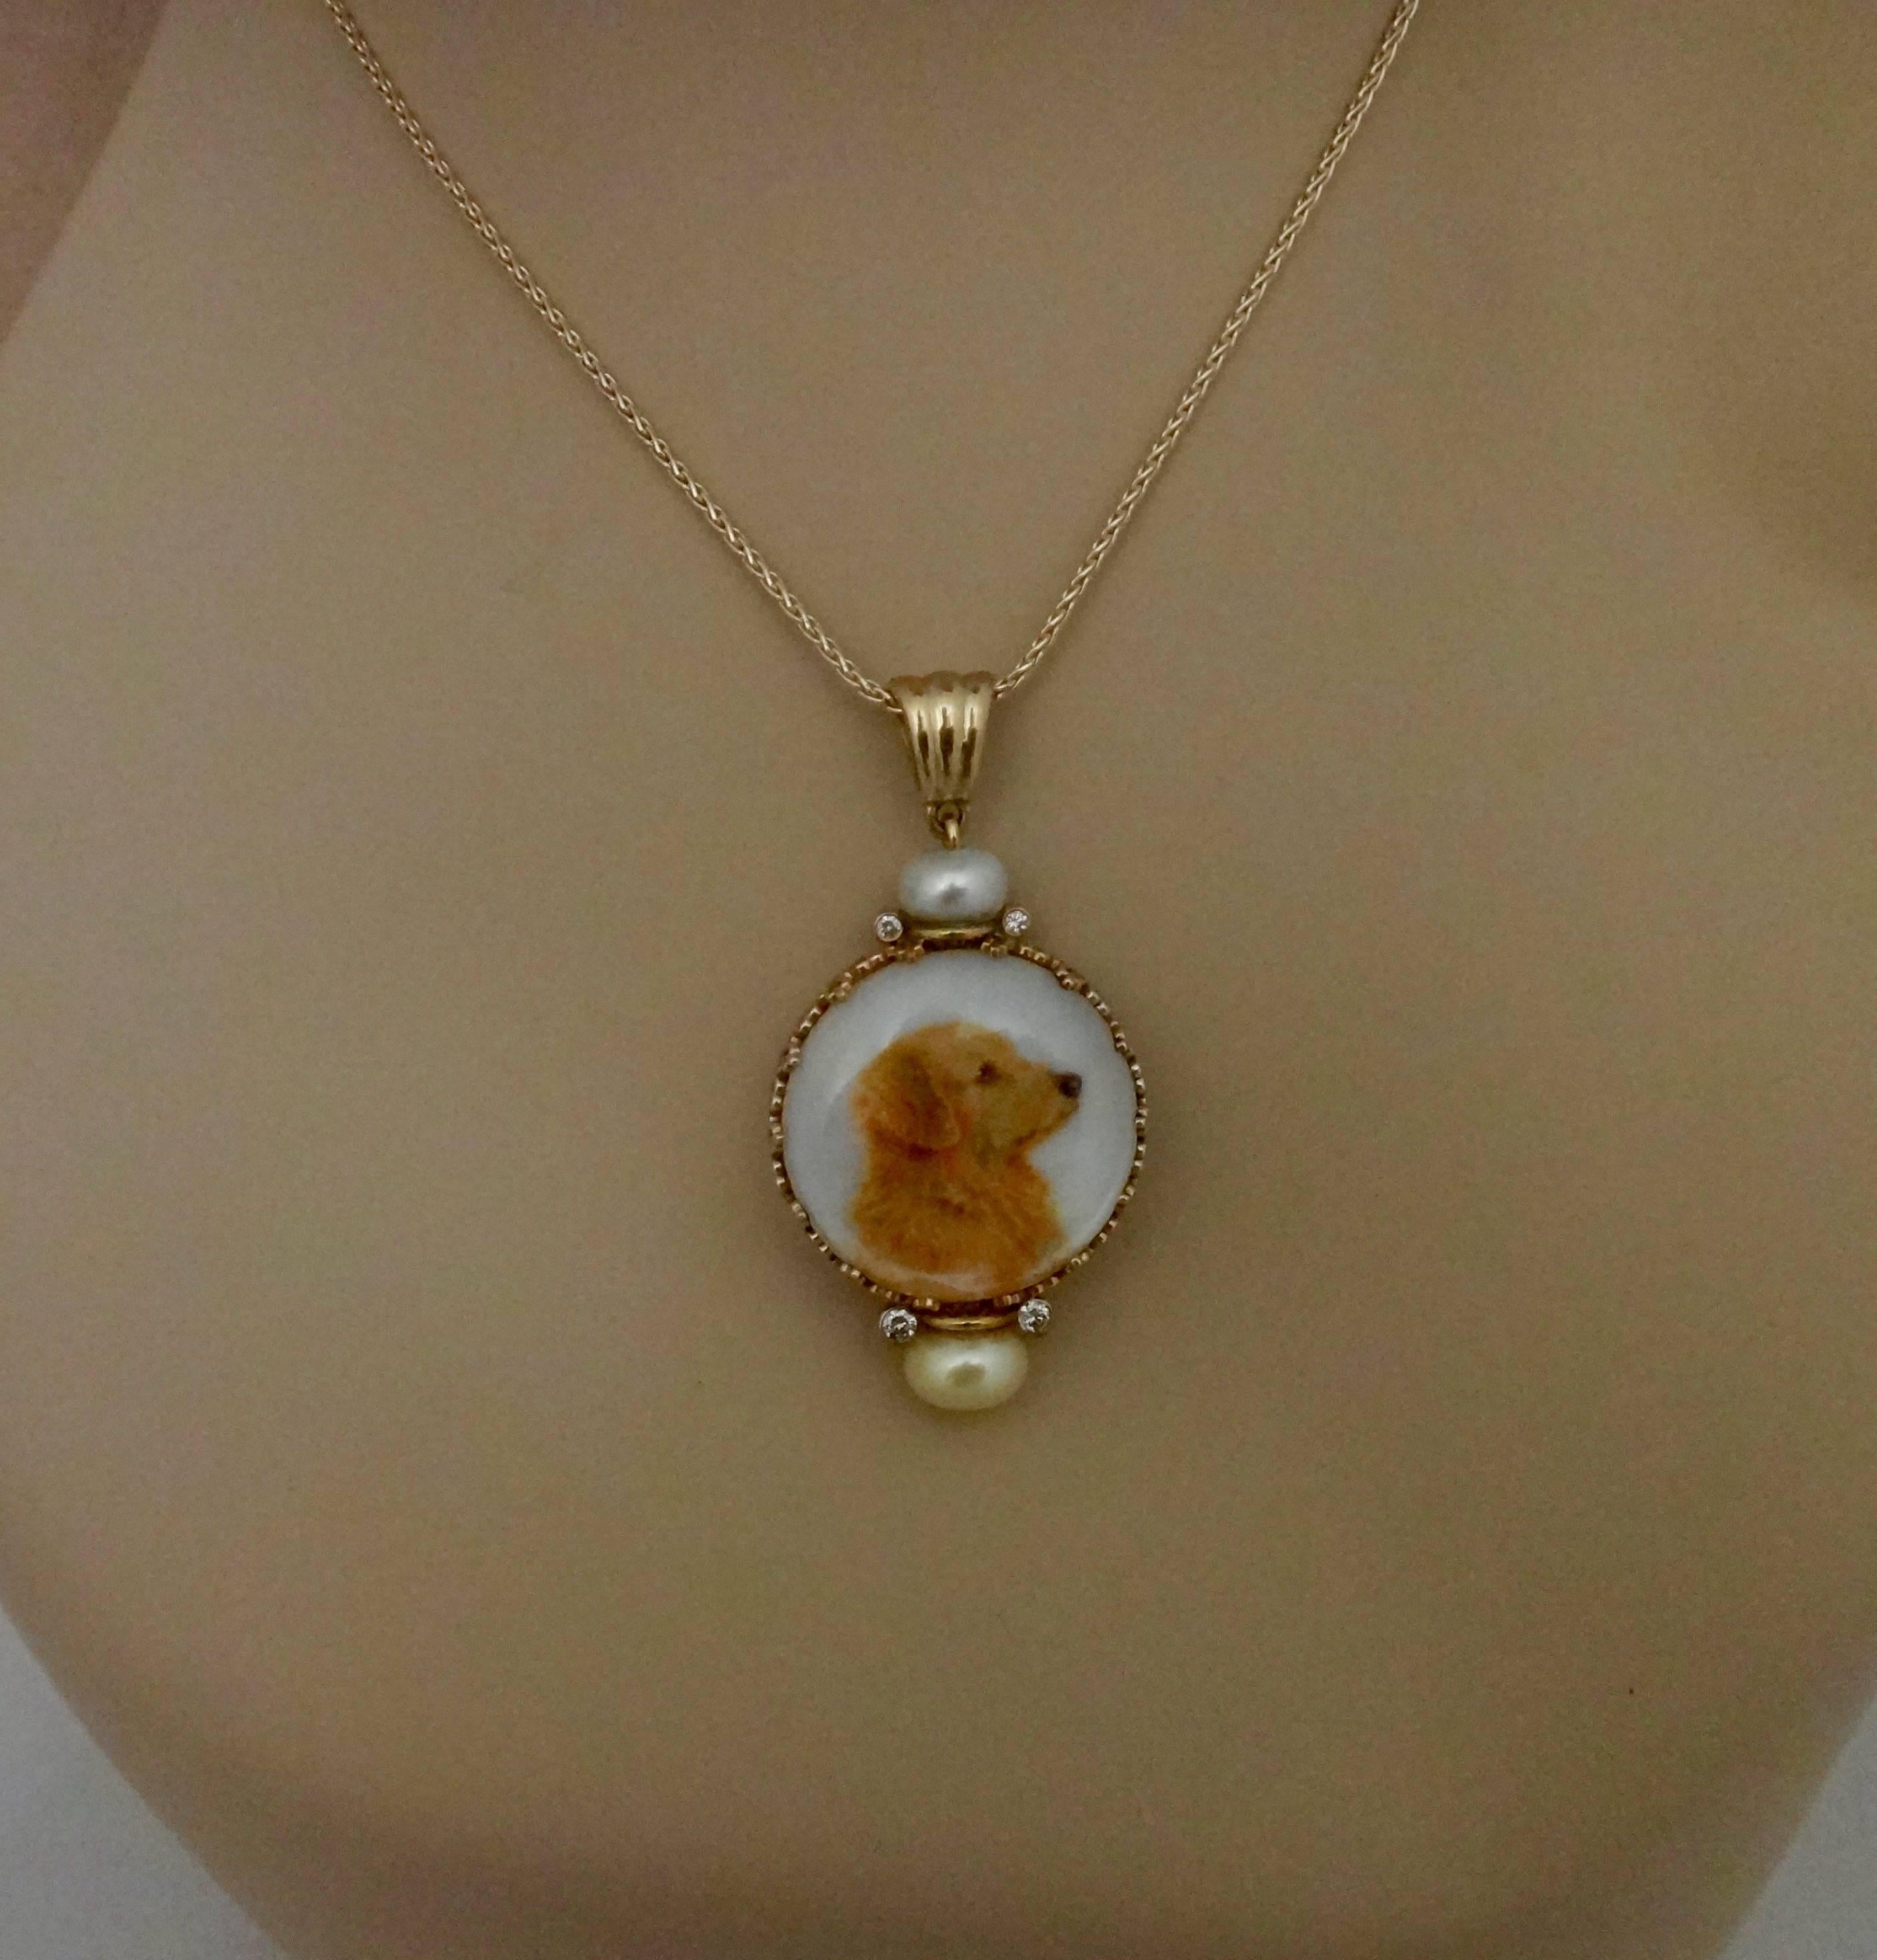 A miniature portrait of a golden retriever is featured in this one-of-a-kind pendant.  The oil on mother-of-pearl painting is by artist Georgina Love.  The painting is protected by a rock crystal lenses, is set in gold and decorated with golden and